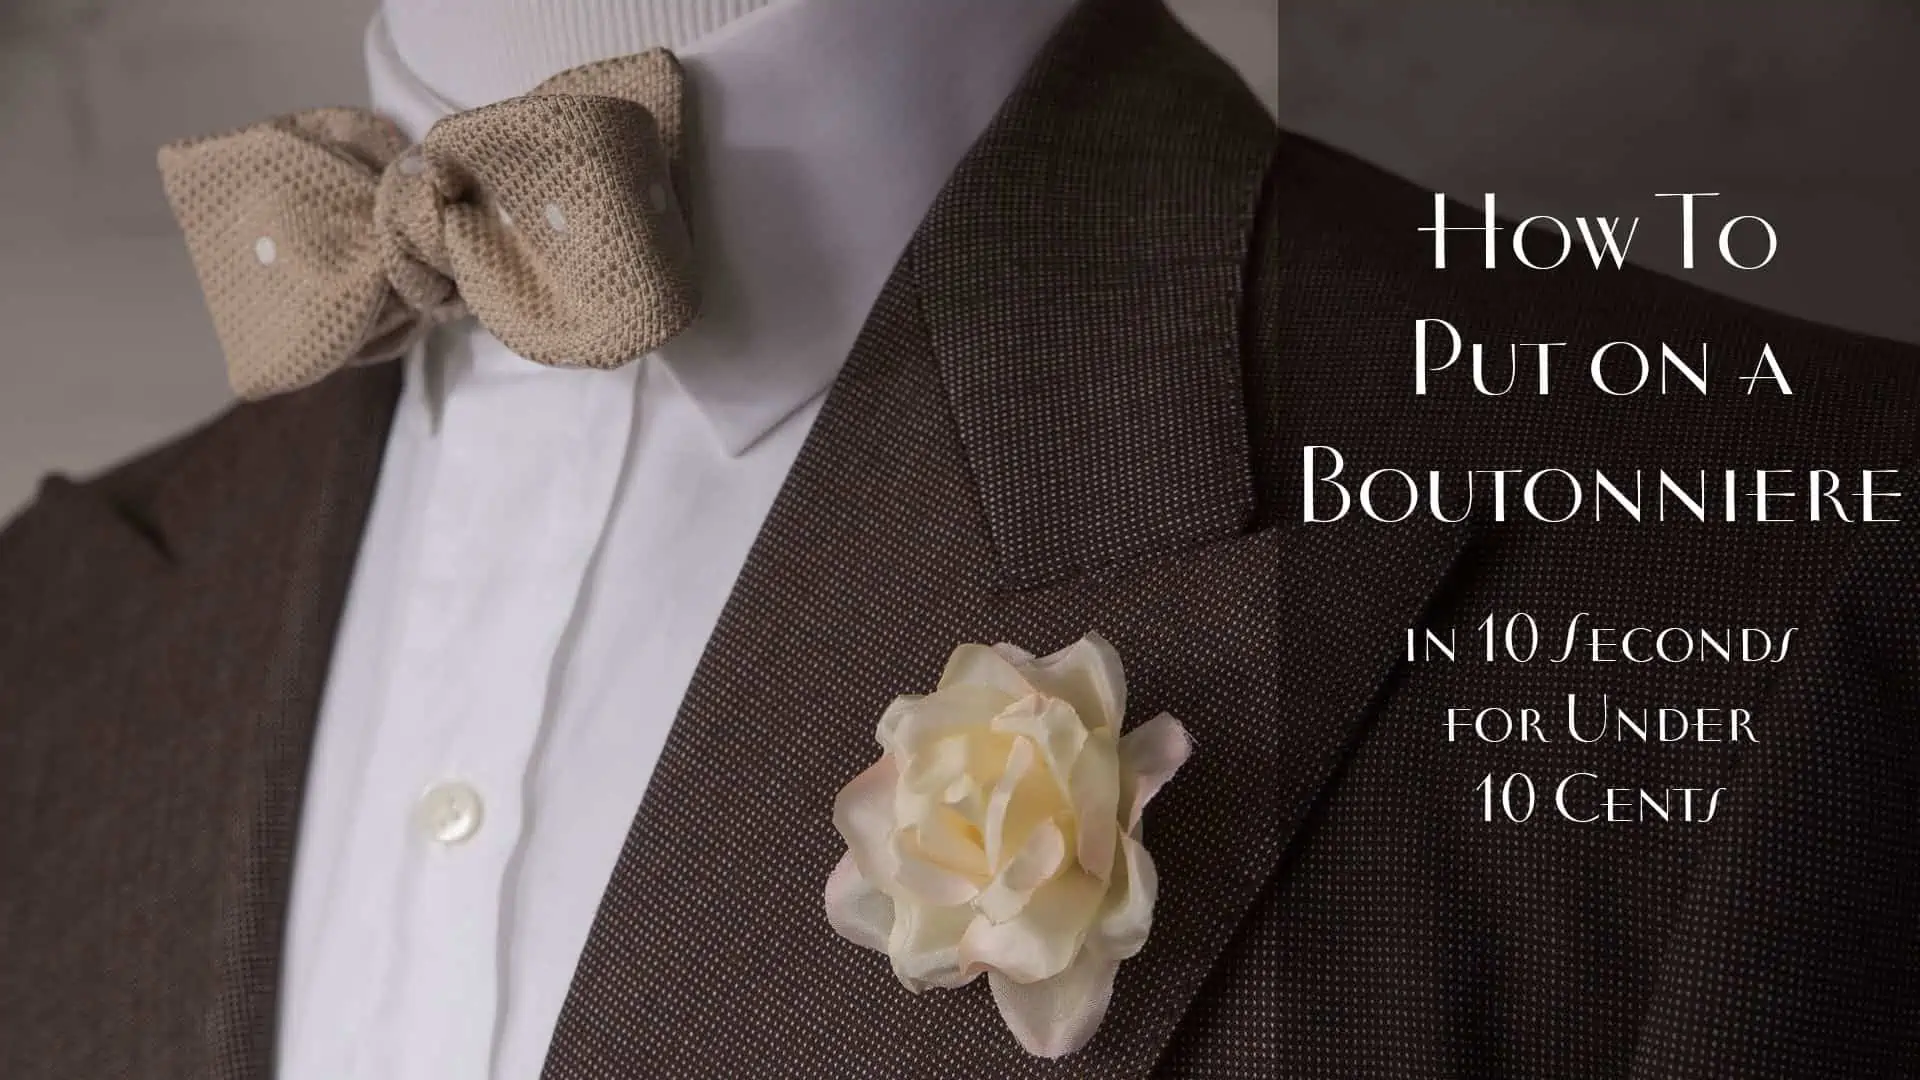 How To Put on a Boutonniere